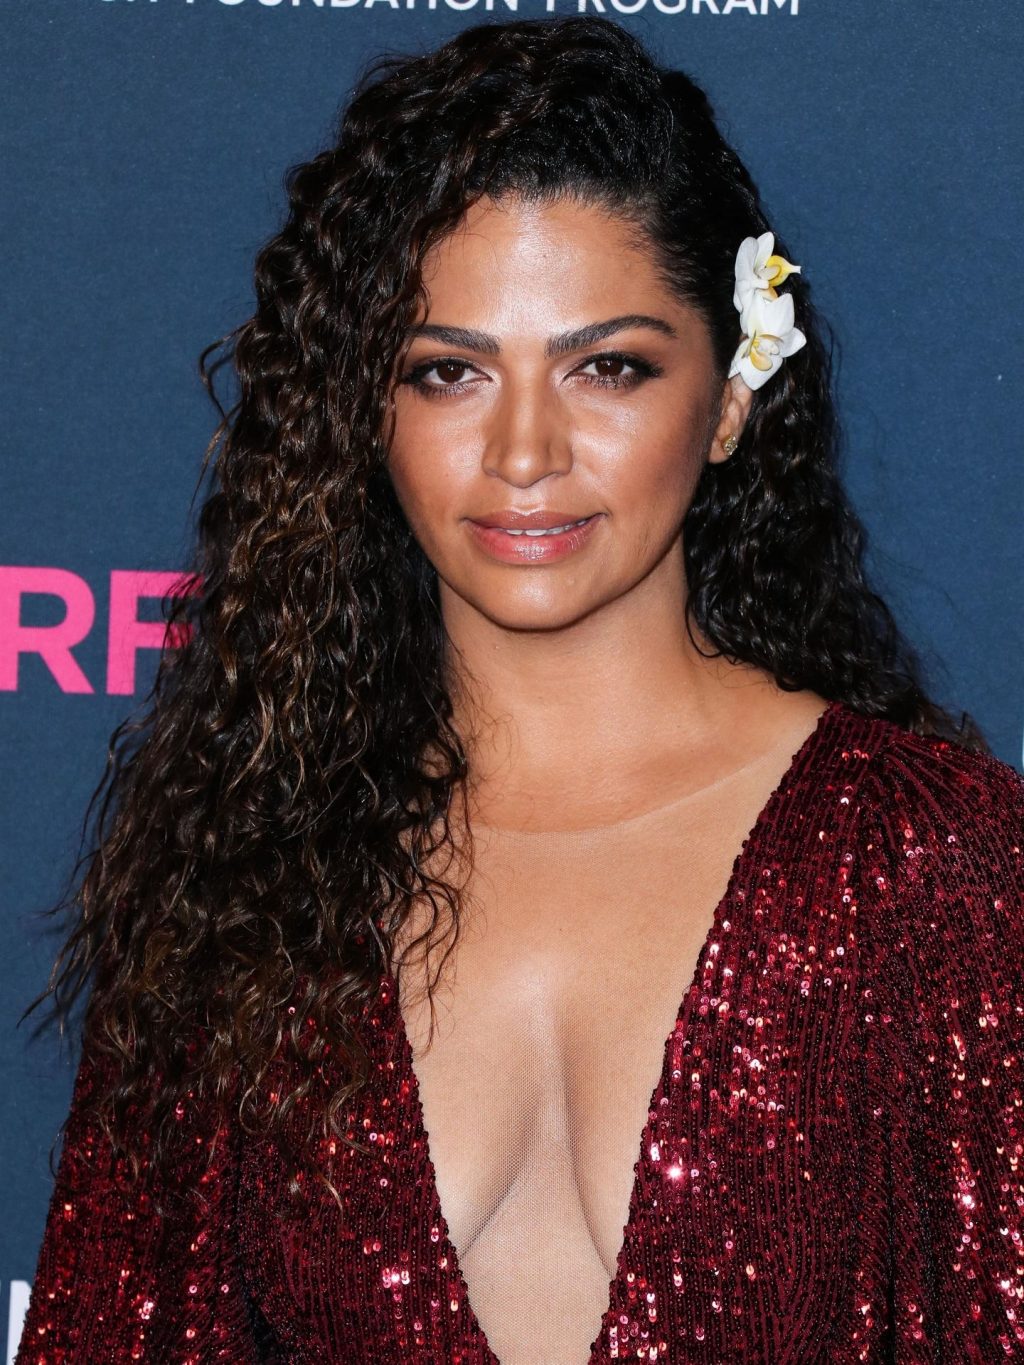 Camila Alves McConaughey Shows Off Her Cleavage at The Event in Beverly Hills (39 Photos)